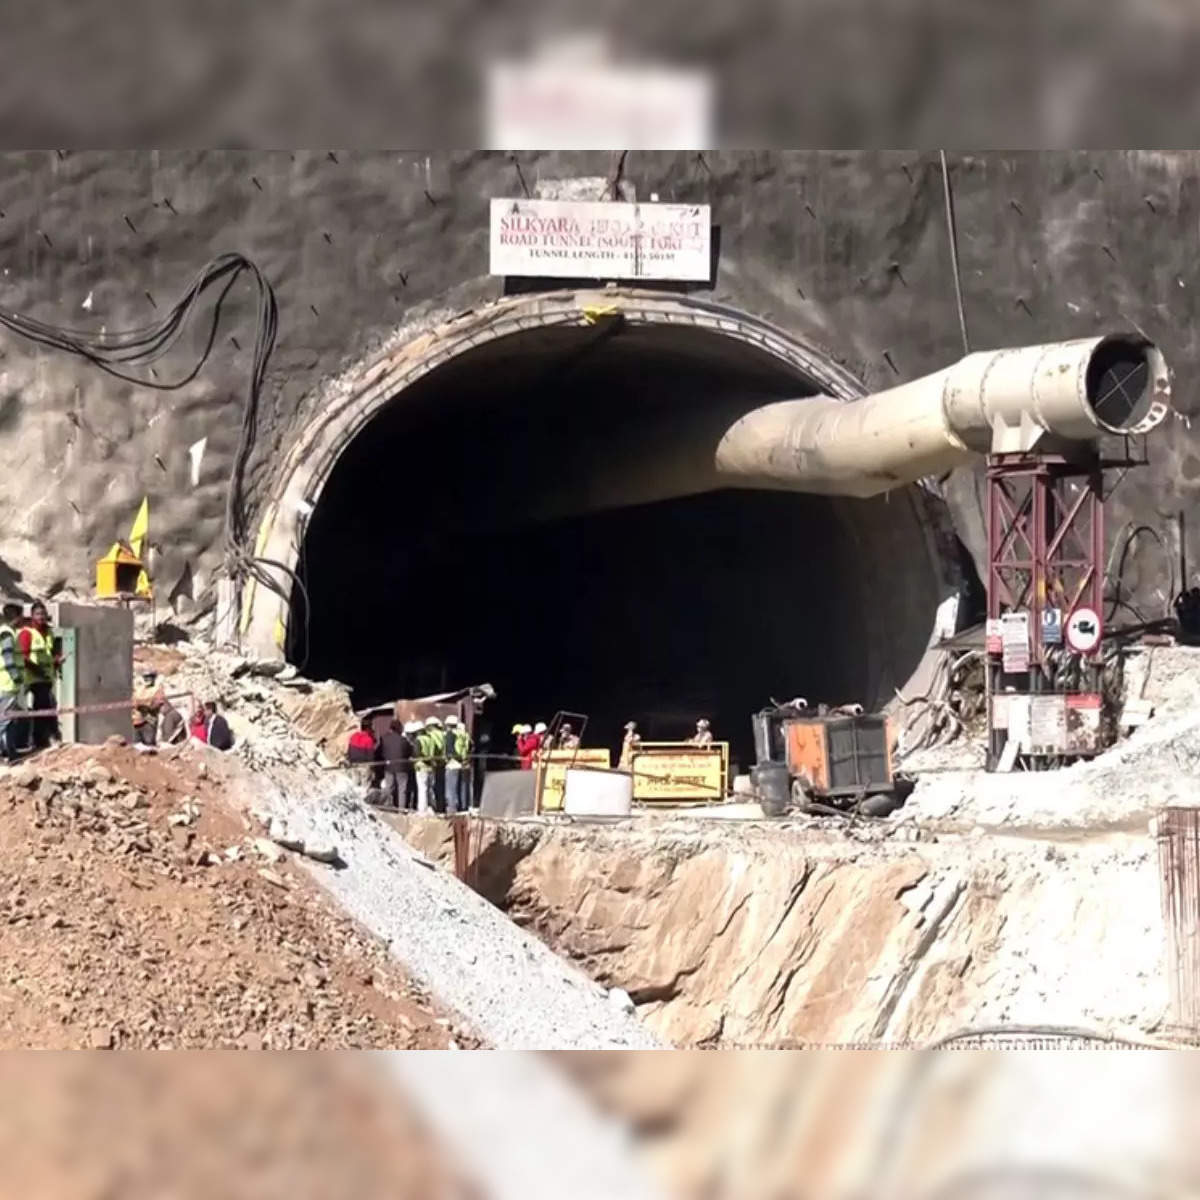 Silkyara tunnel collapse: 6-inch-wide pipe reaches trapped labourers;  rescuers say now will go with 'full force' - The Economic Times